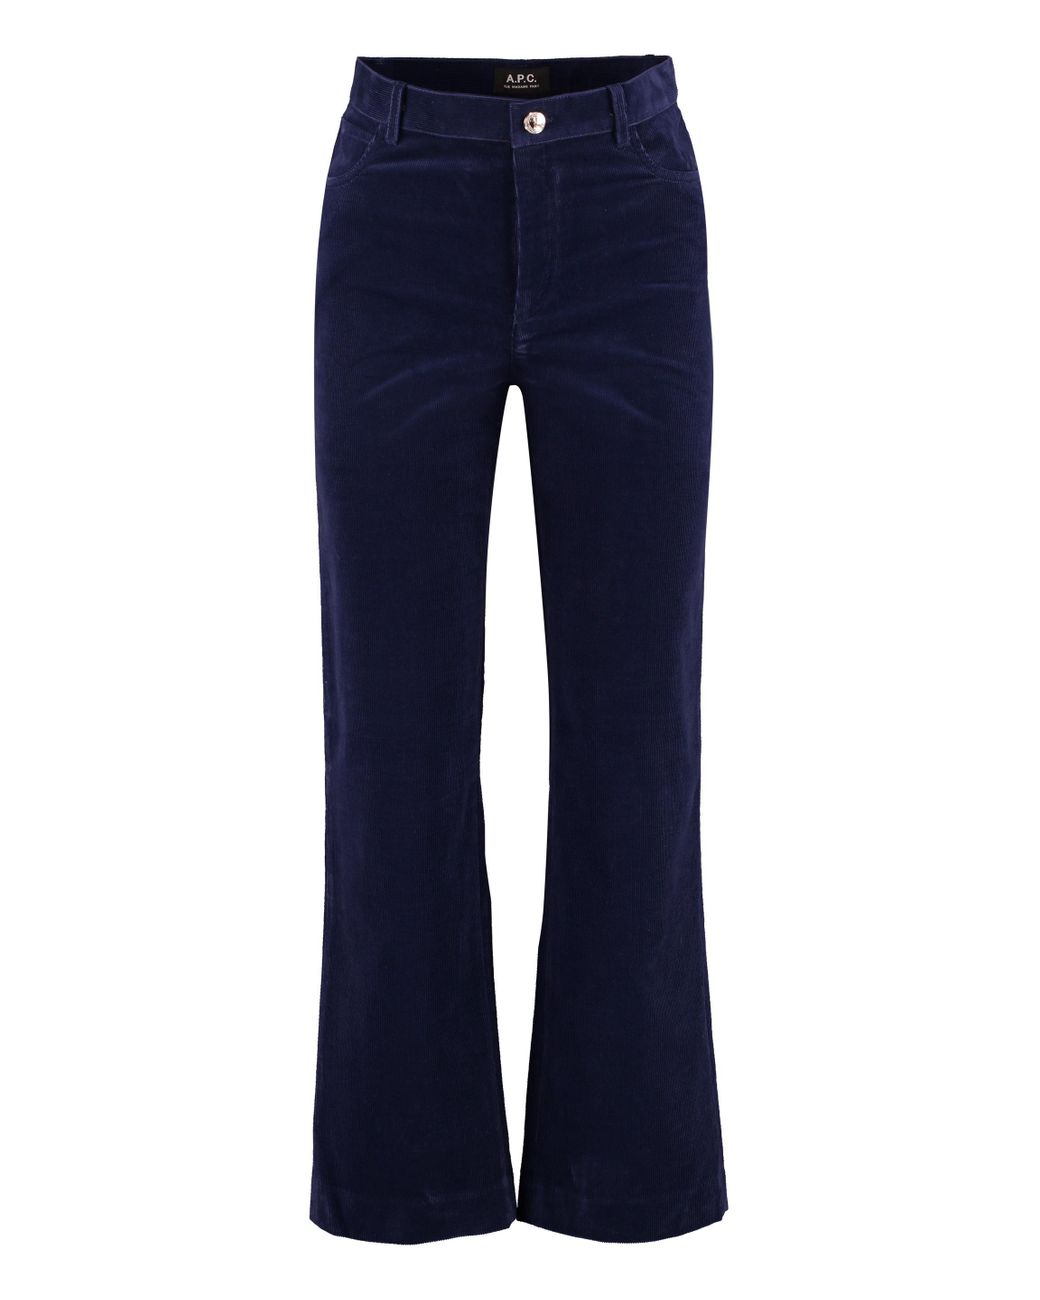 A.P.C. Corduroy Trousers in Blue - Lyst